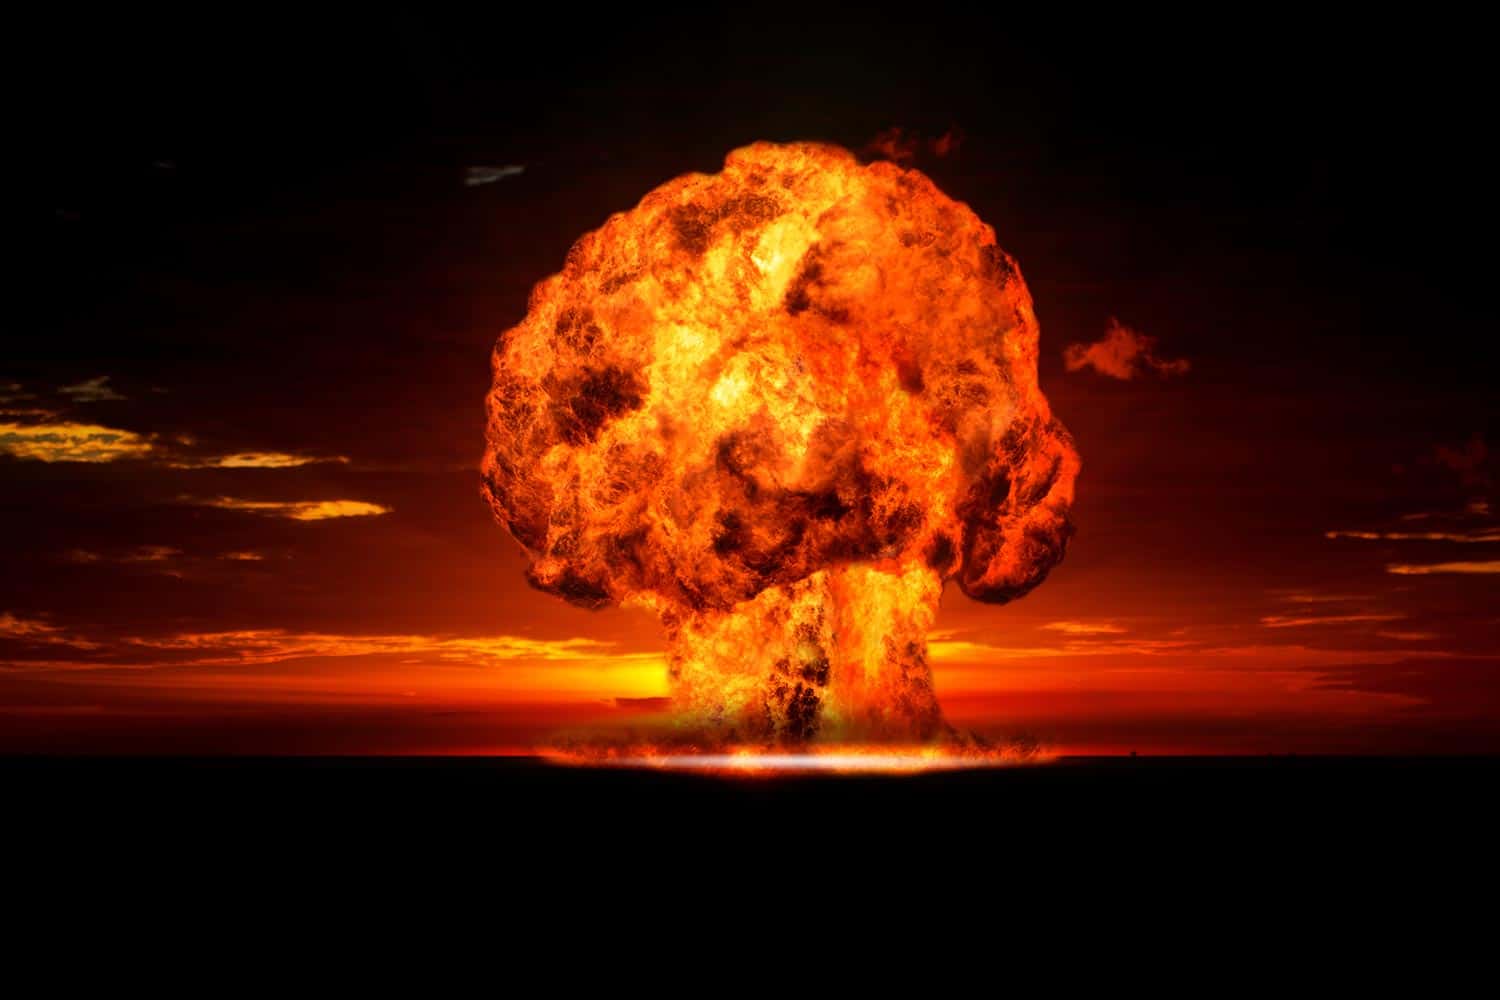 Nuclear explosion in an outdoor setting